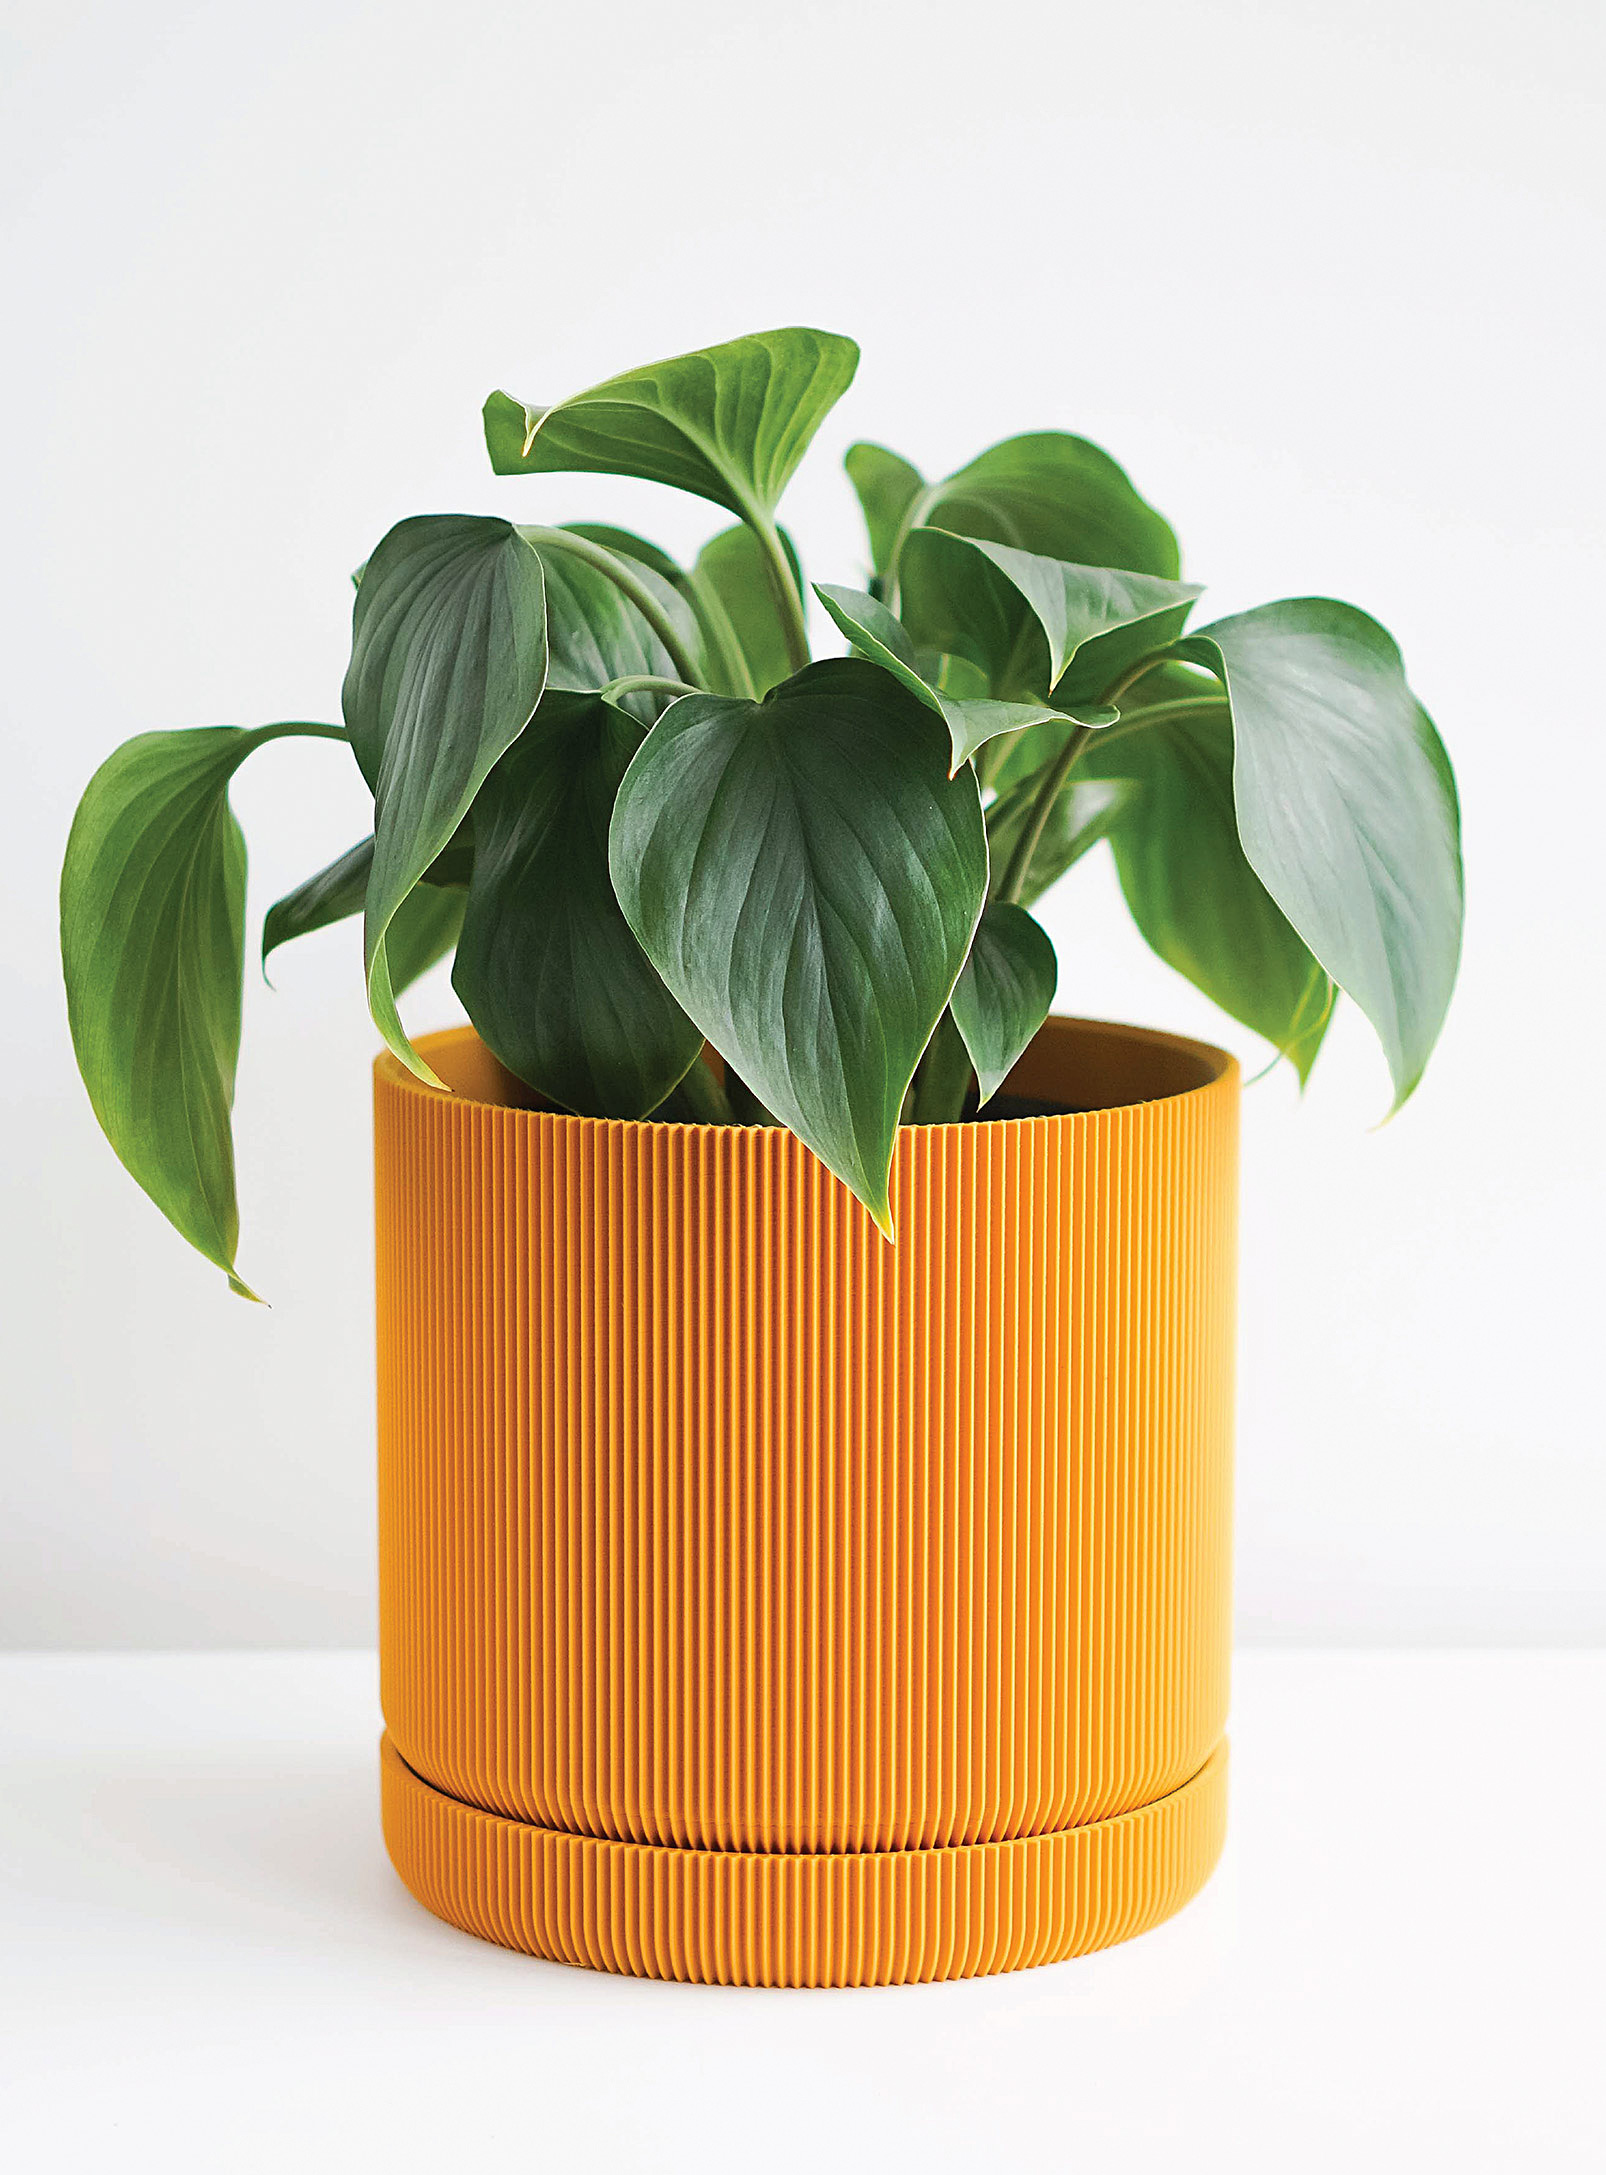 Conifer Homewares Hemlock Plant-based Planter See Available Sizes In Golden Yellow